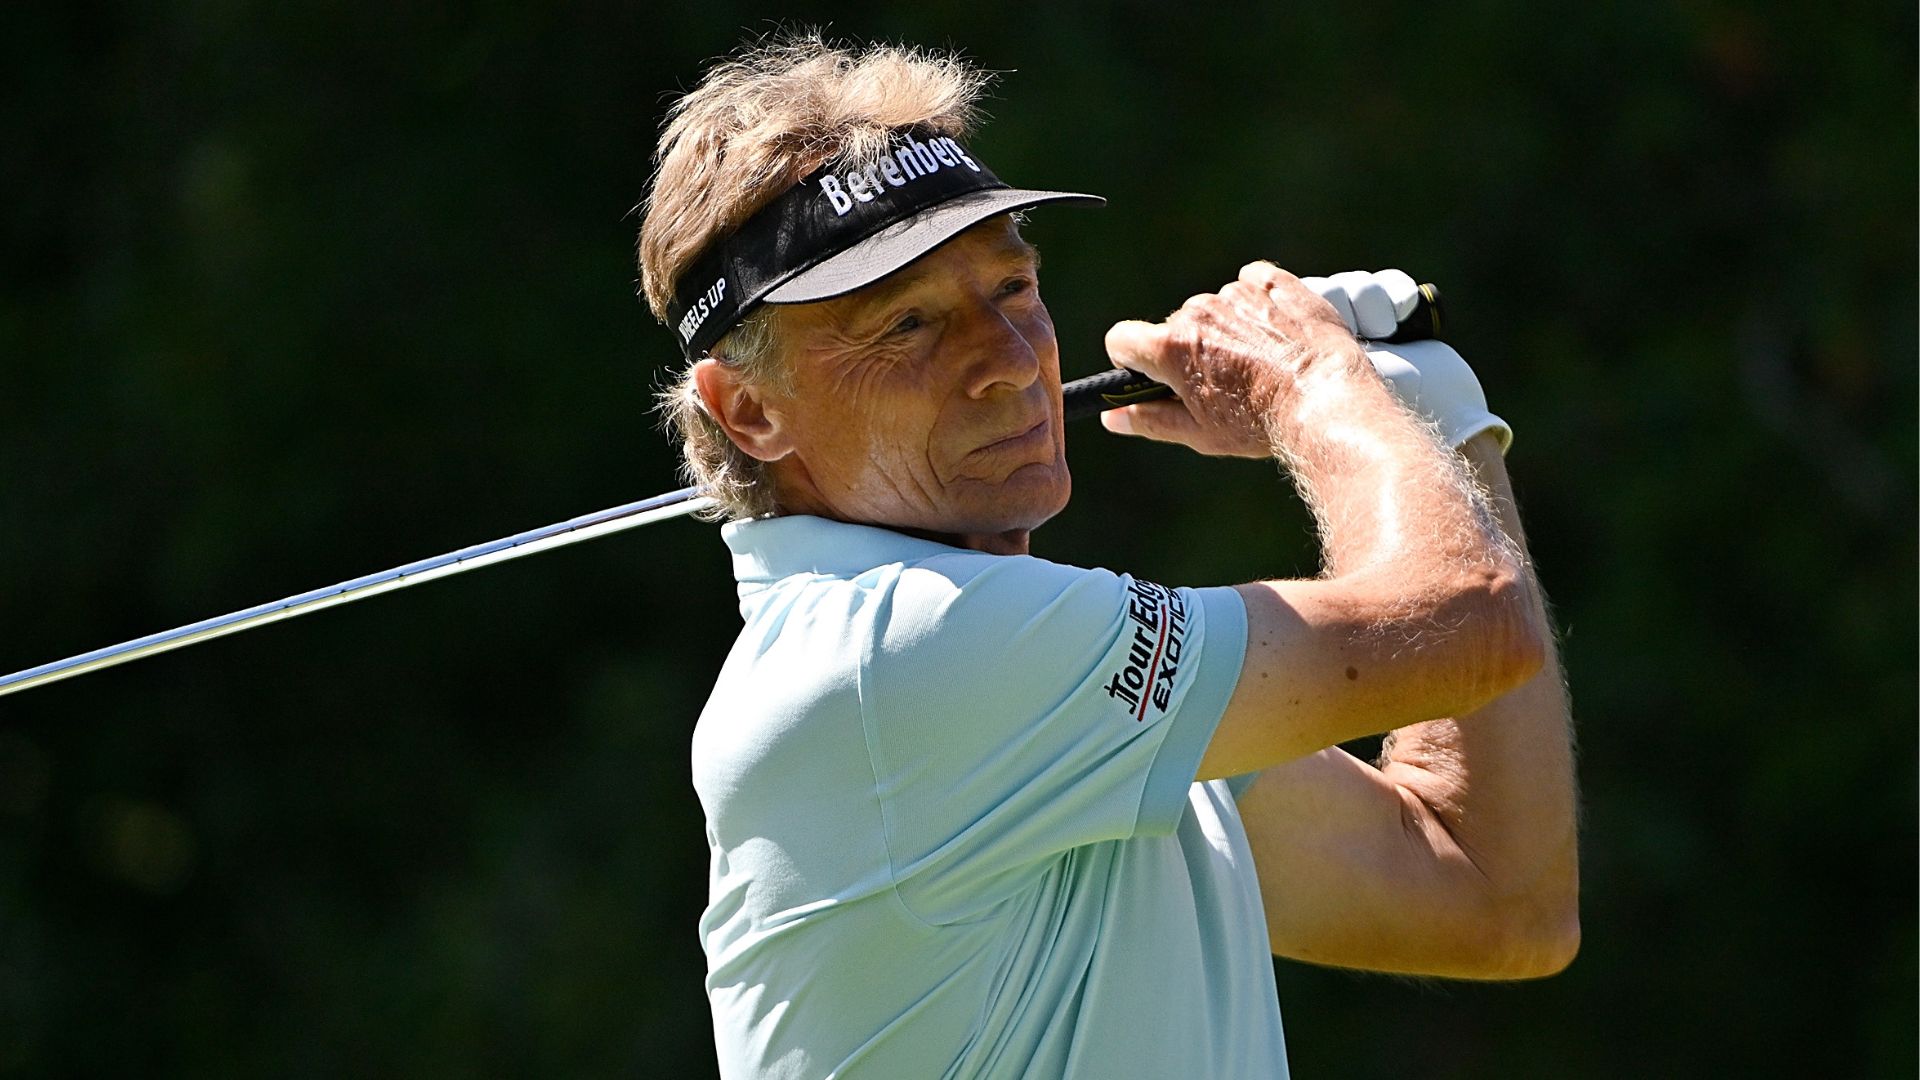 Bernhard Langer ‘getting closer’ to thinking about retirement, but not stopping now